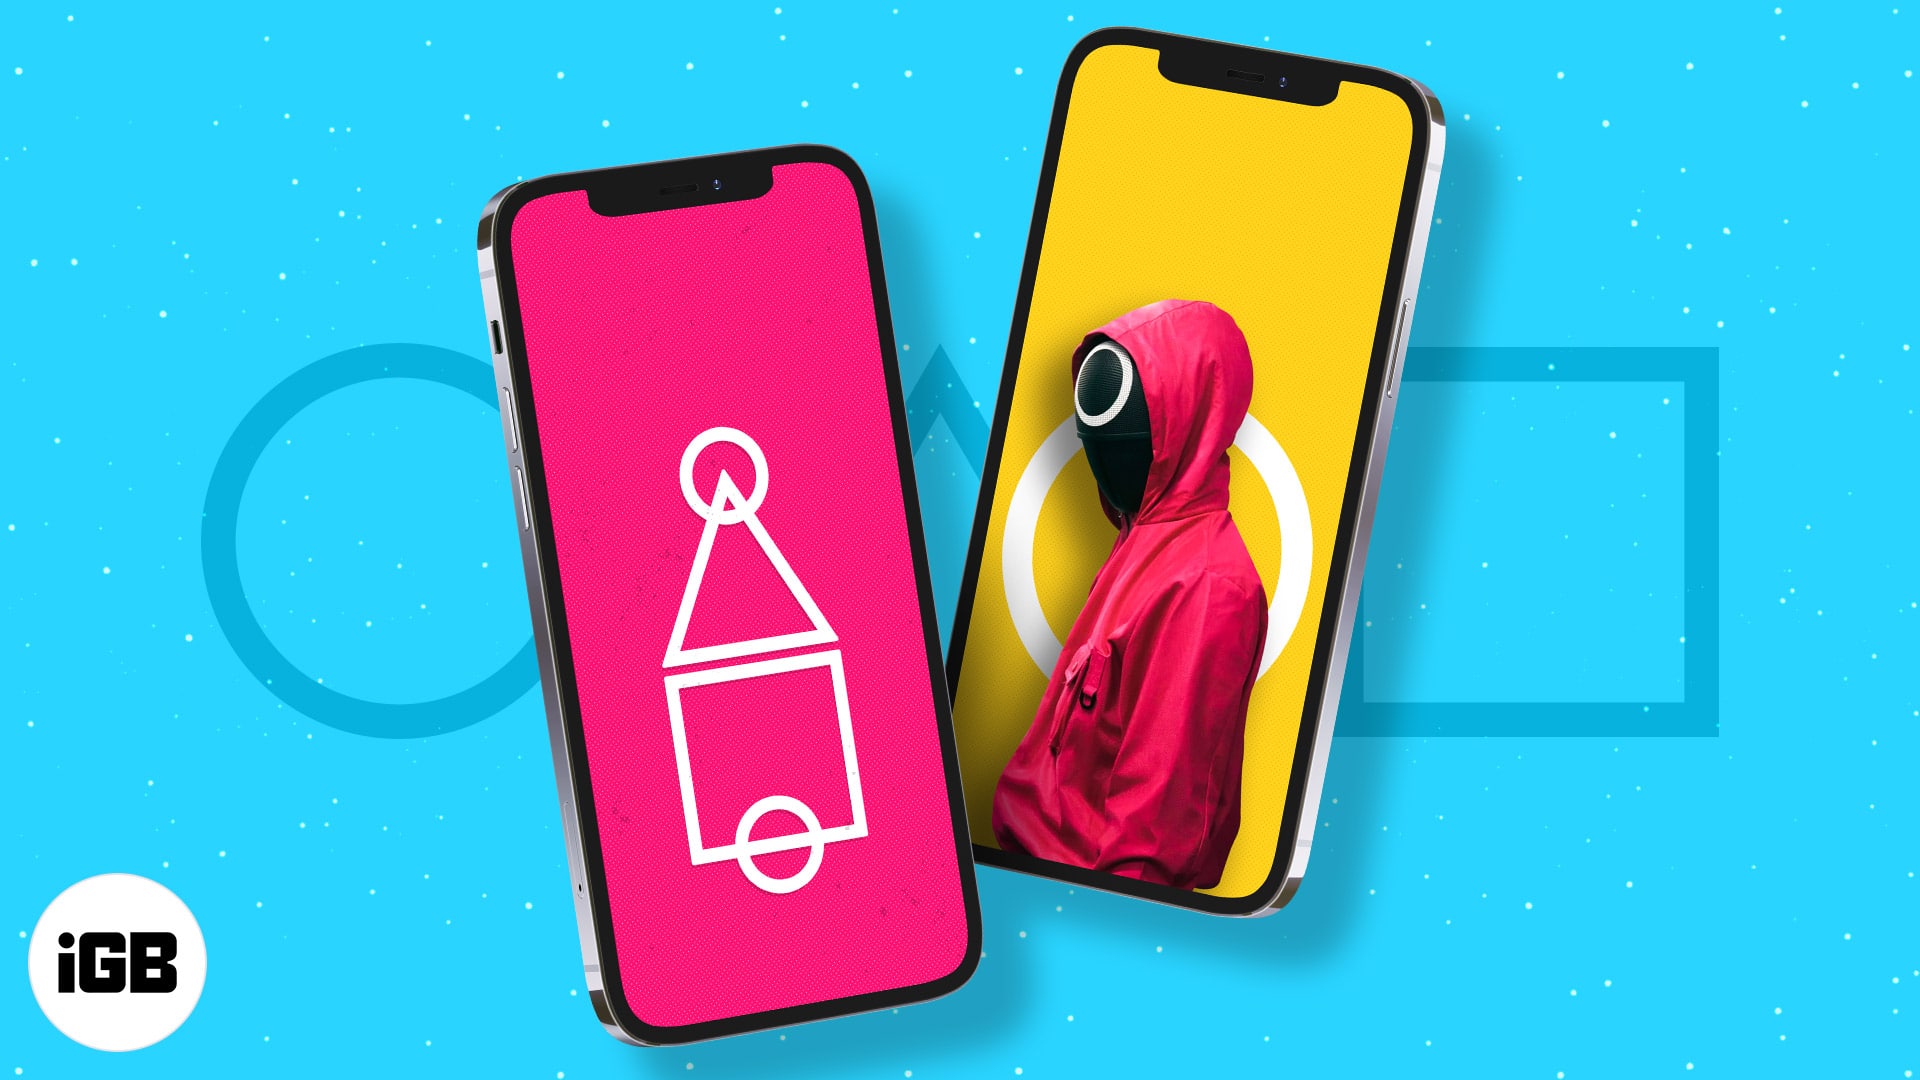 Squid Game wallpapers for iPhone and desktop